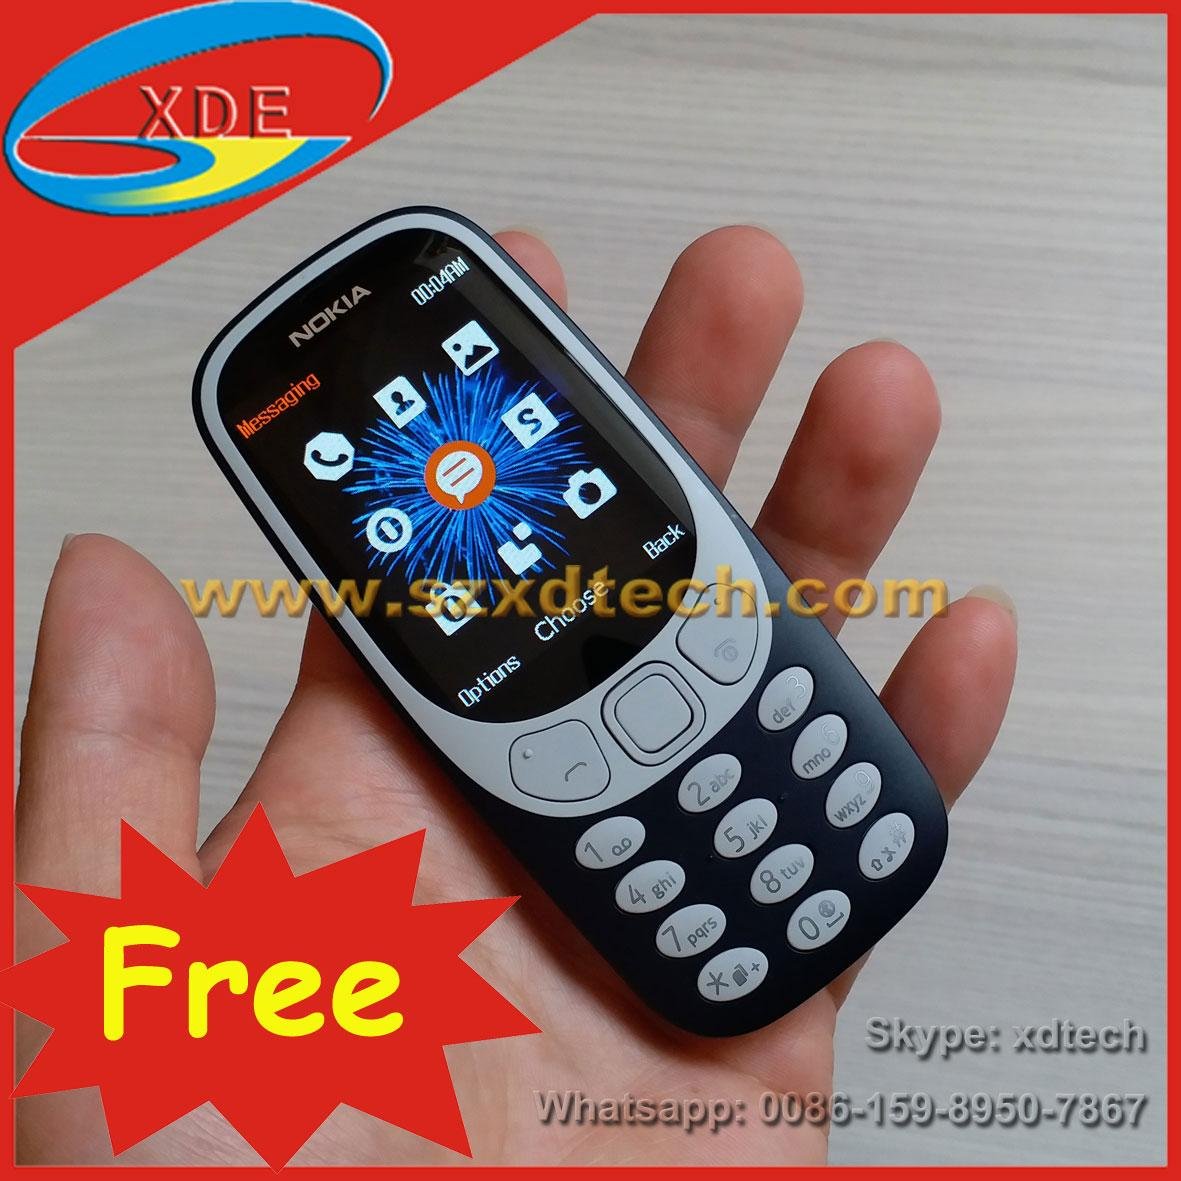 Free Shipping Original Quality Nokia 3310 1:1 Size Good Battery Cheap  Phones - XD-Nokia 3310 A (China Manufacturer) - Mobile Phones - Mobile